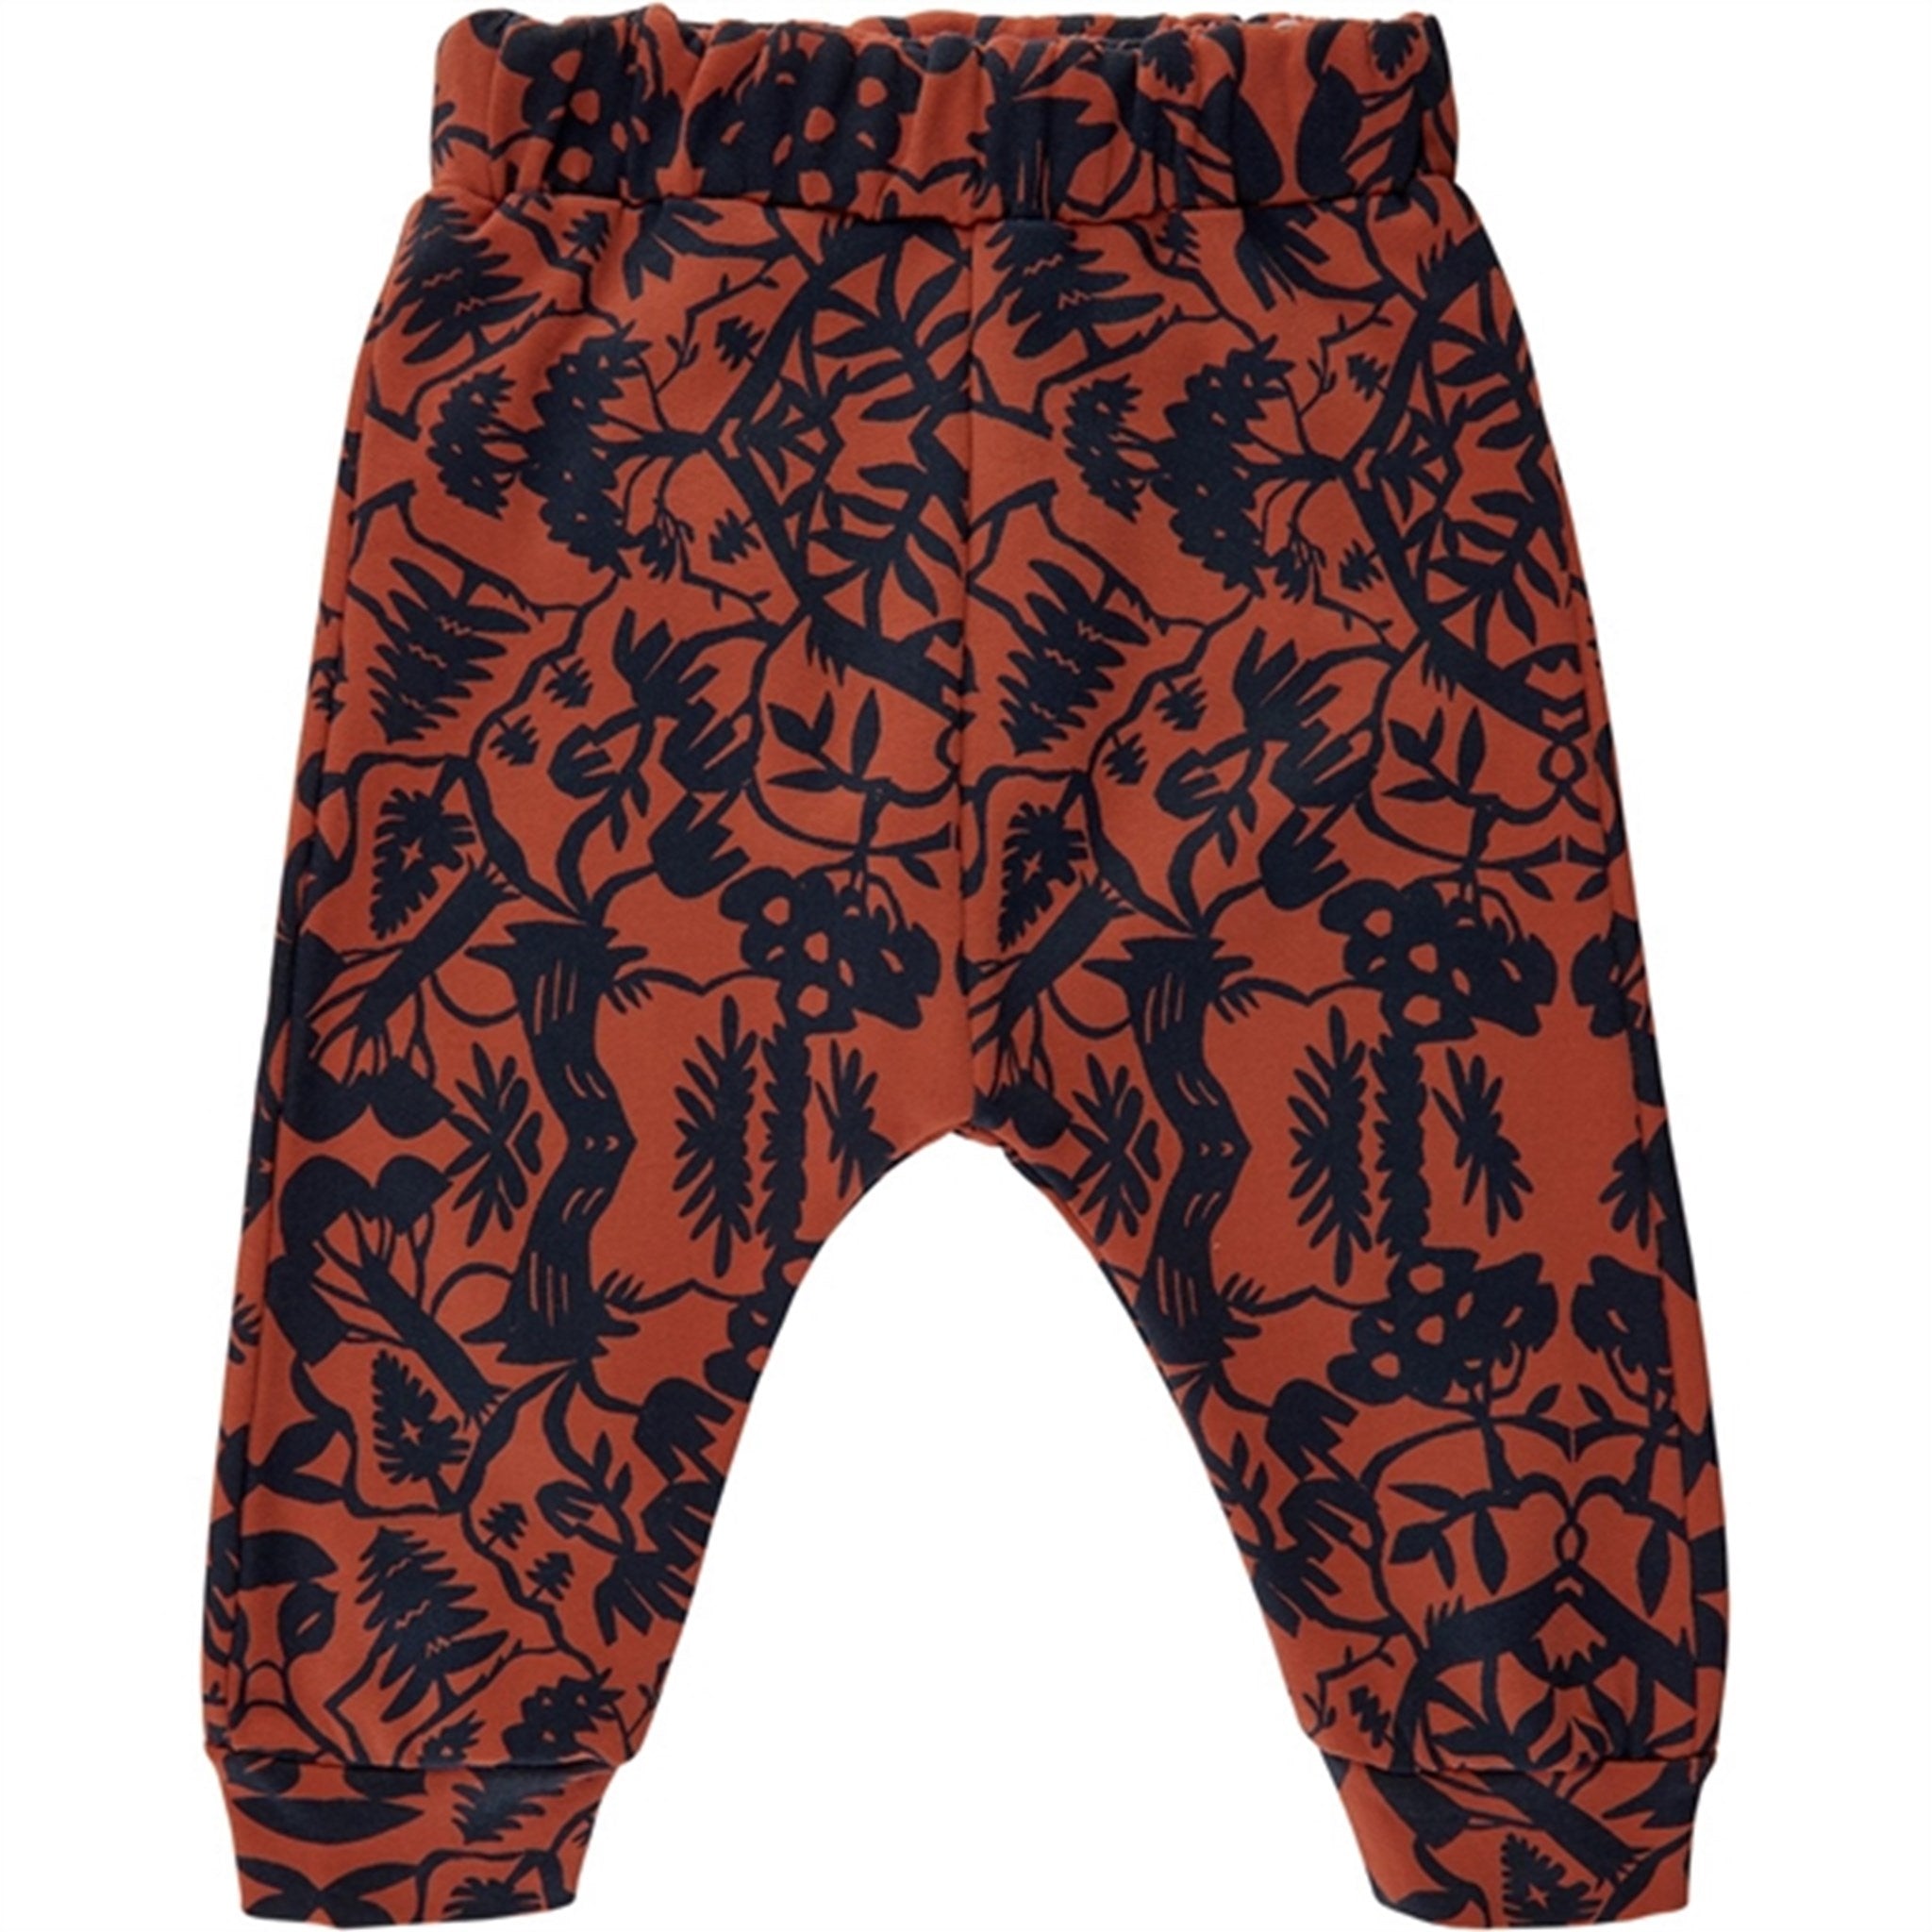 Soft Gallery Baked Clay Jeo Papertree Sweatpants